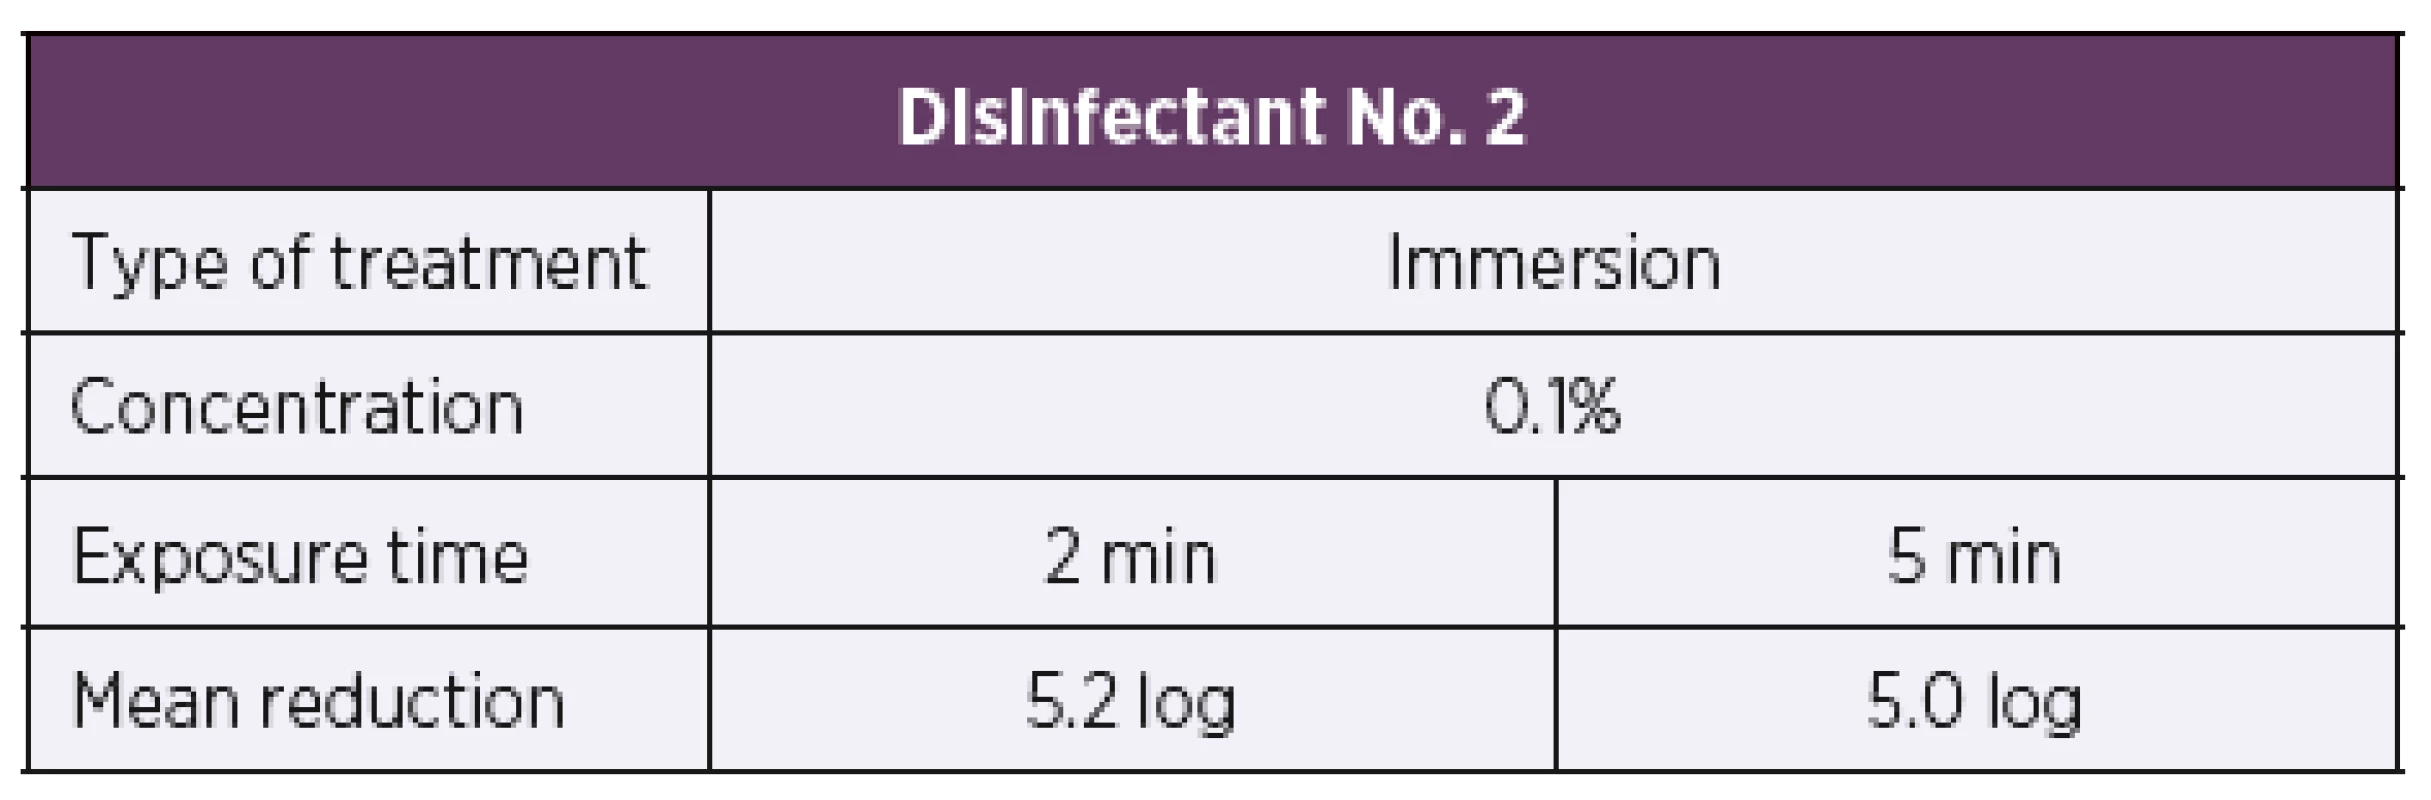 Overview of the mean log reduction in the bacterial counts
achieved using disinfectant No. 2 depending on the concentration
and exposure time when tested by the carrier immersion method